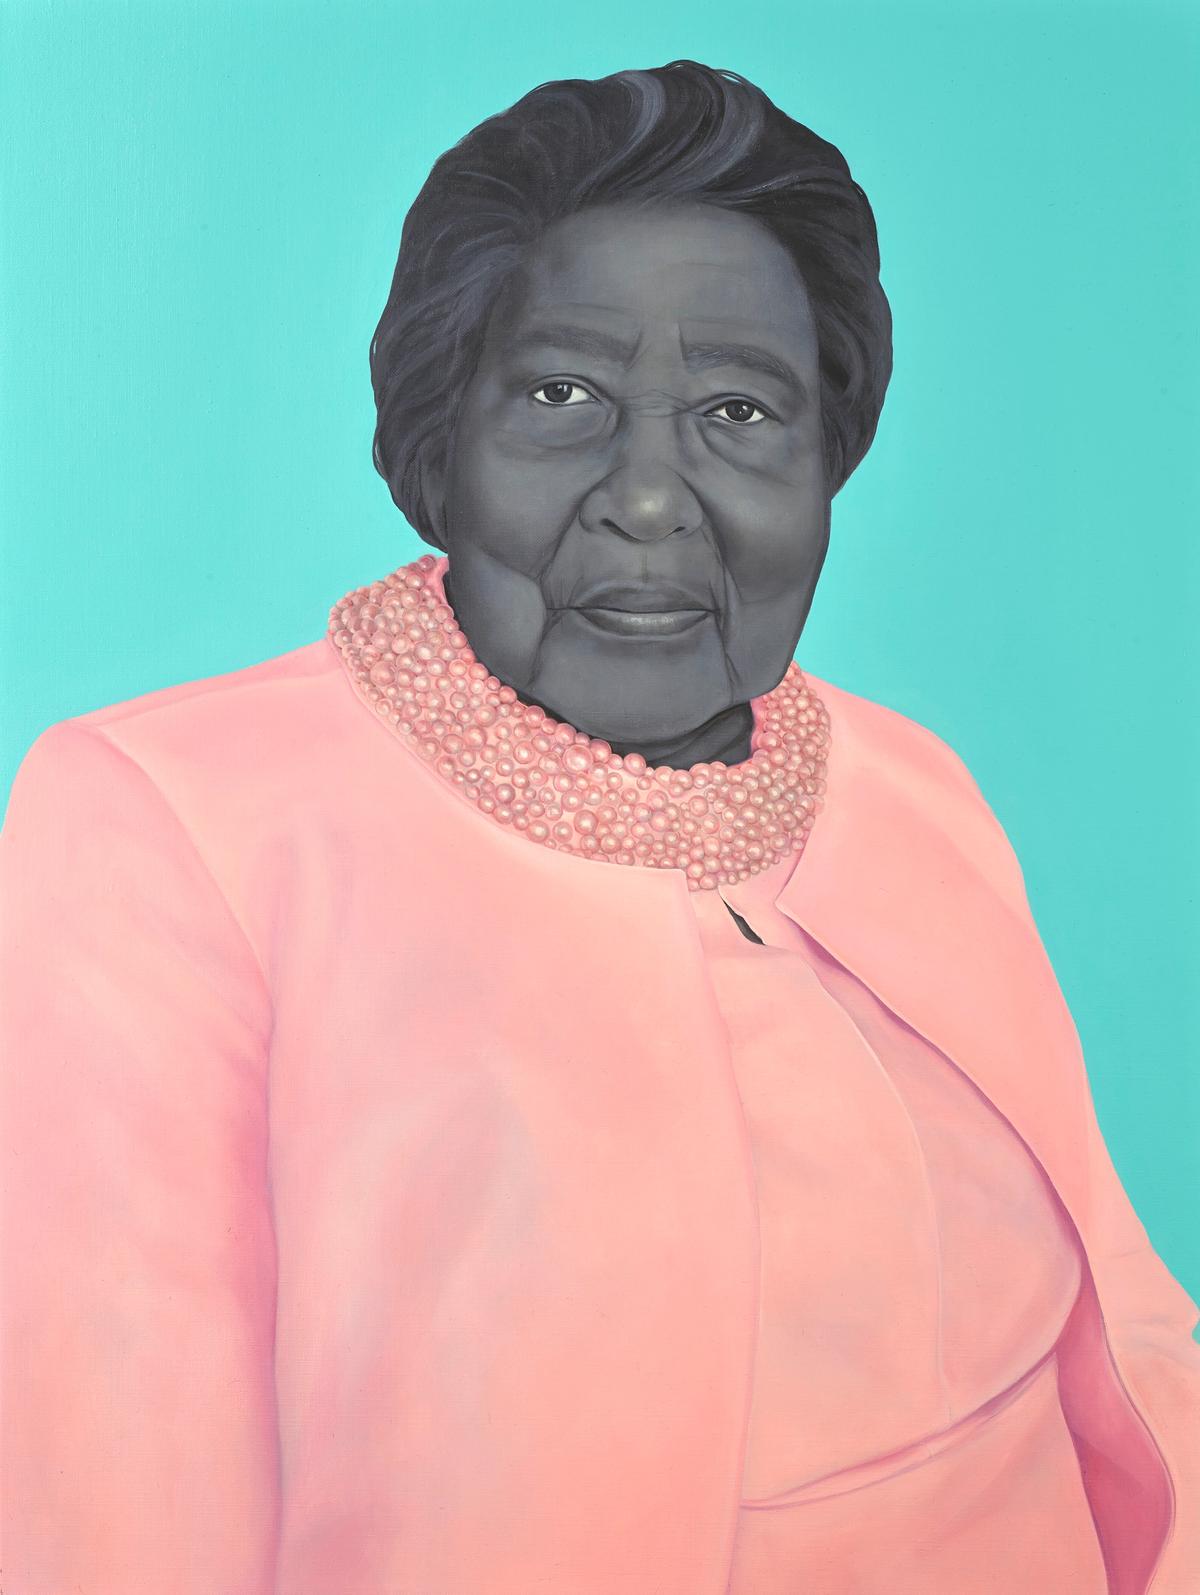 Amy Sherald's portrait of Edna Henry

© Amy Sherald. Photograph: Royal Collection Trust/© His Majesty King Charles III 2023